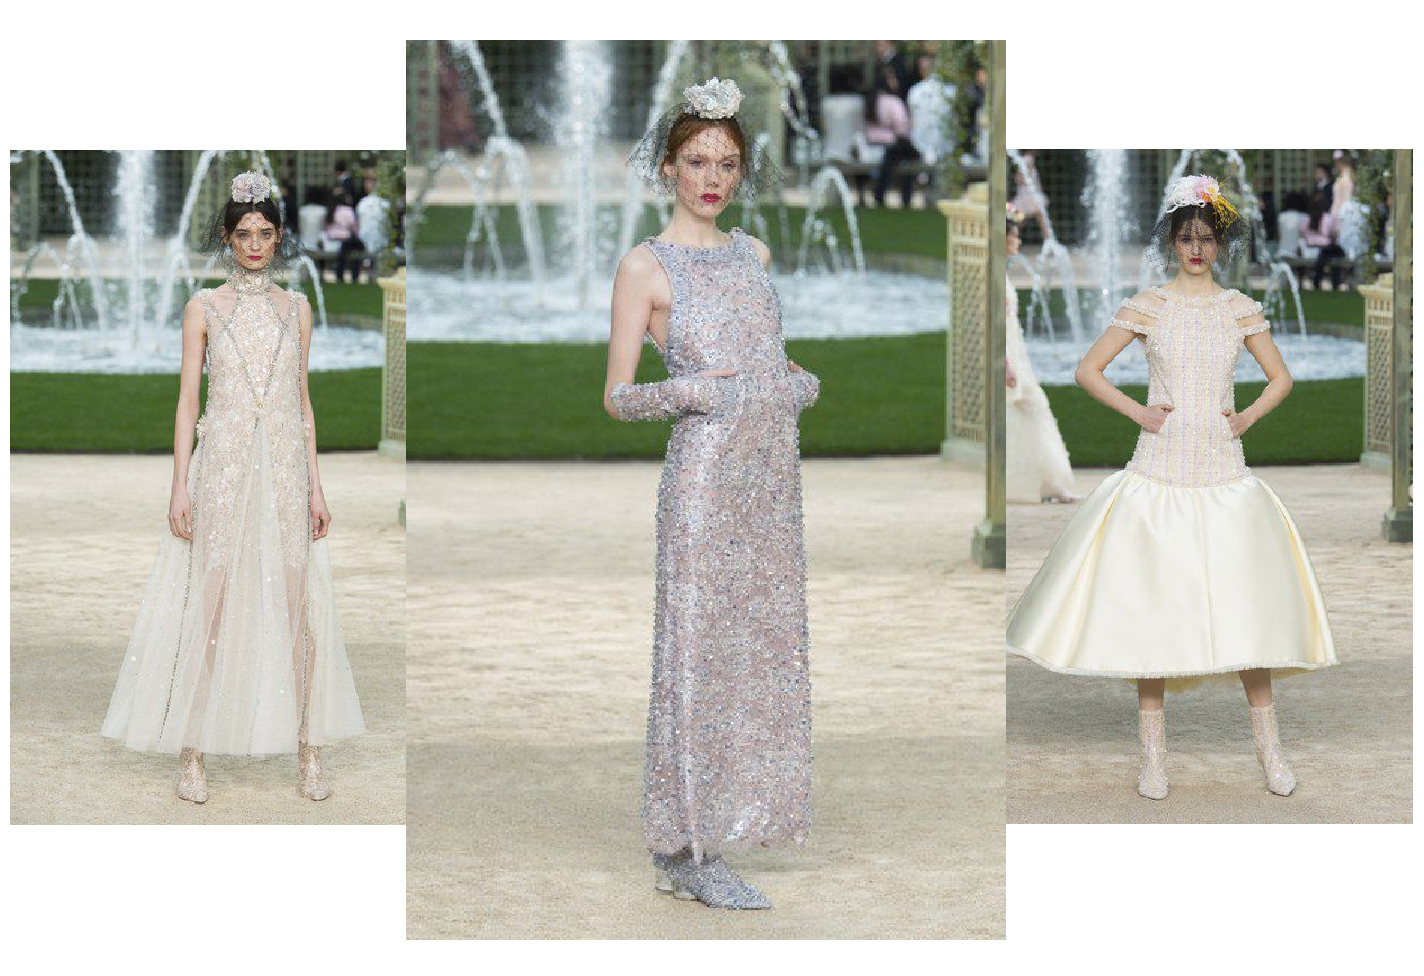 The flower garden of Chanel SS18 Haute Couture collection